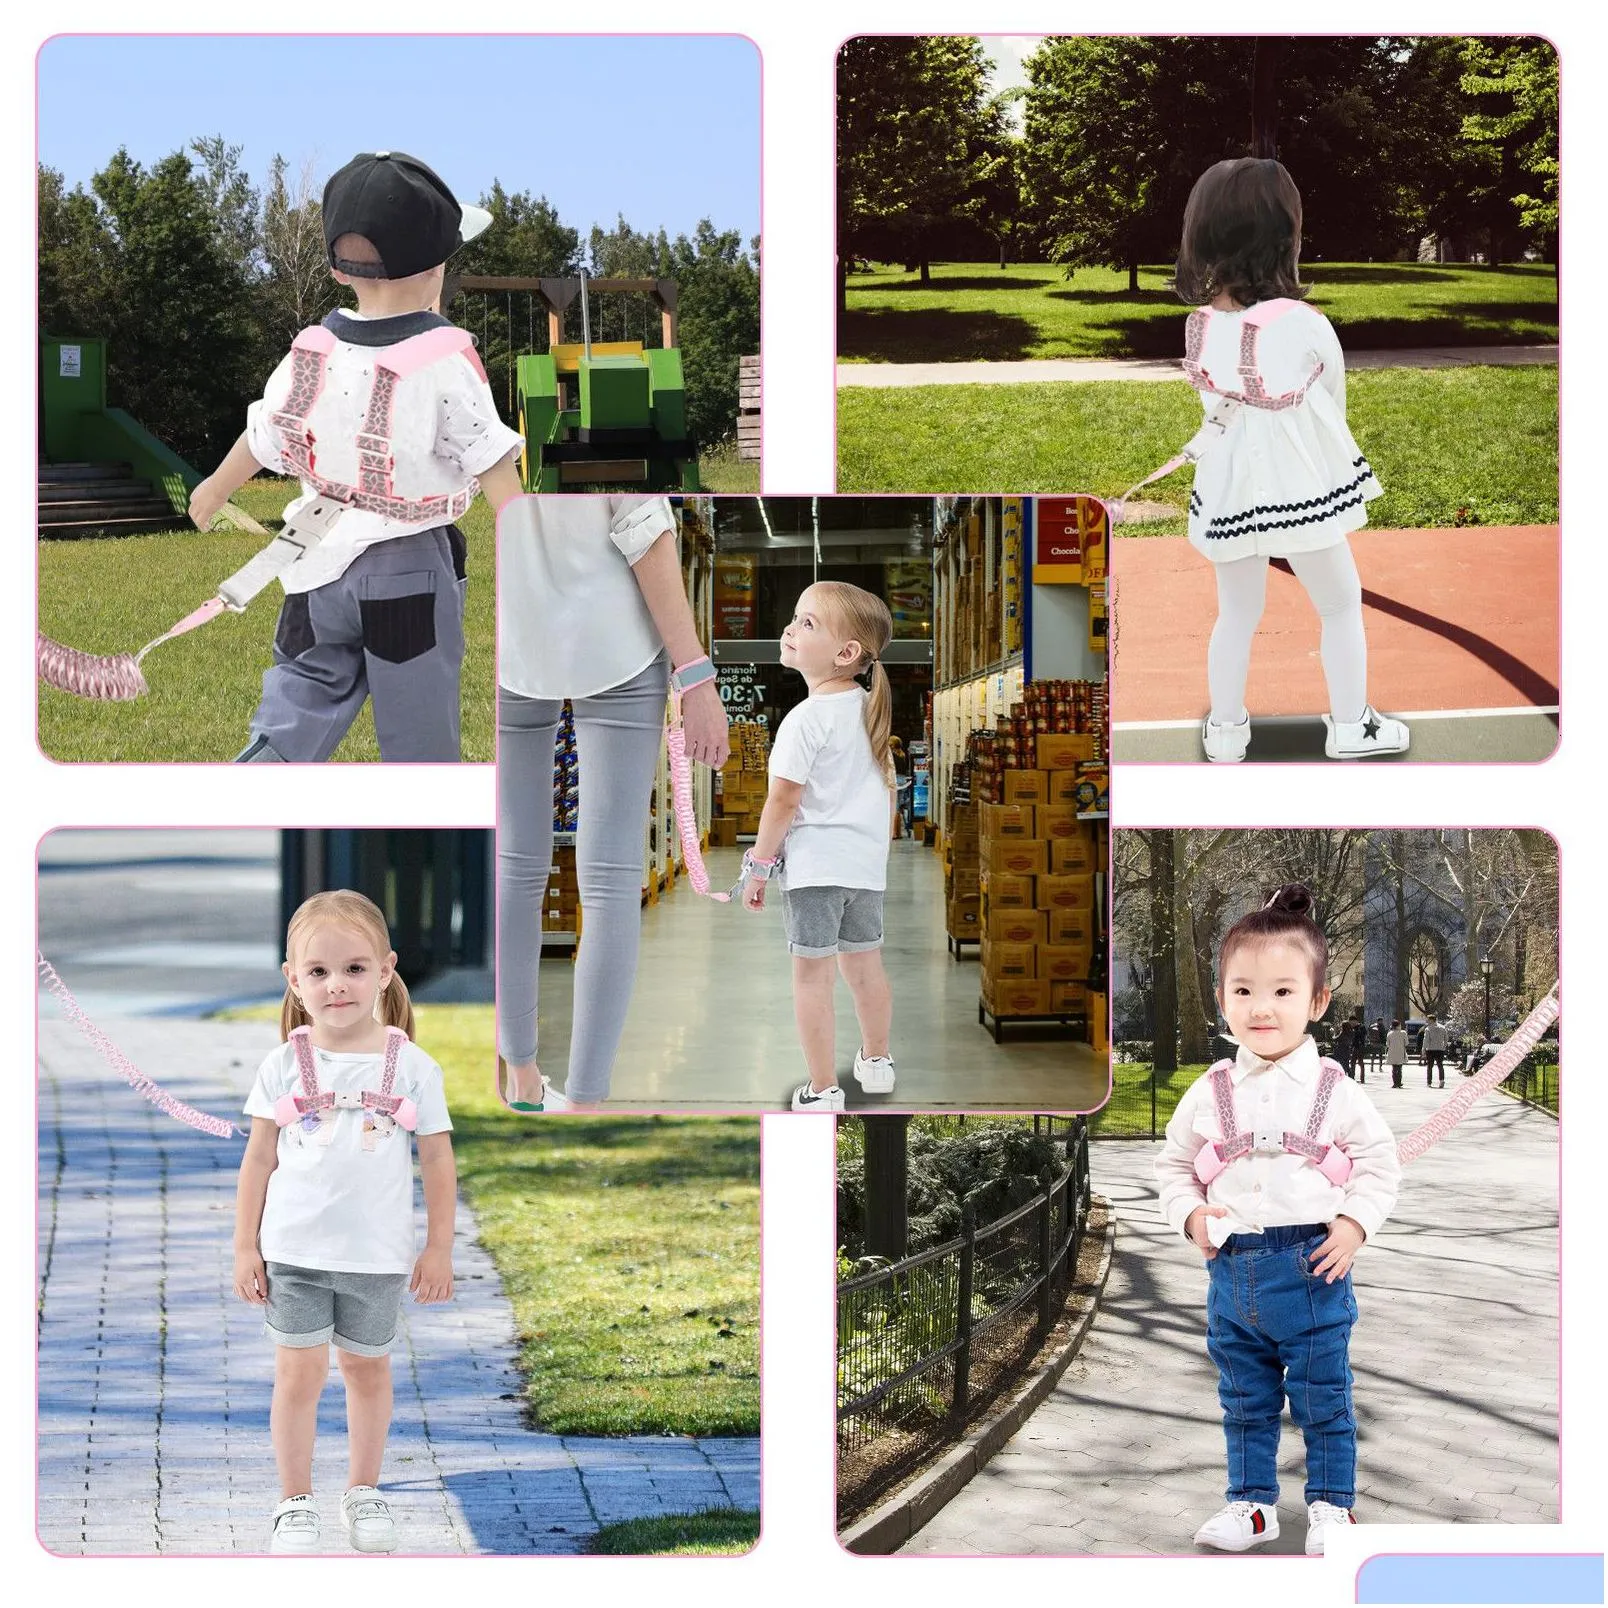 Baby Walking Wings Baby Walking Safety Backpack Toddlers Leash Anti Lost Wrist Link Child Travel Bag for Kids Outdoor Activity Baby Accessories